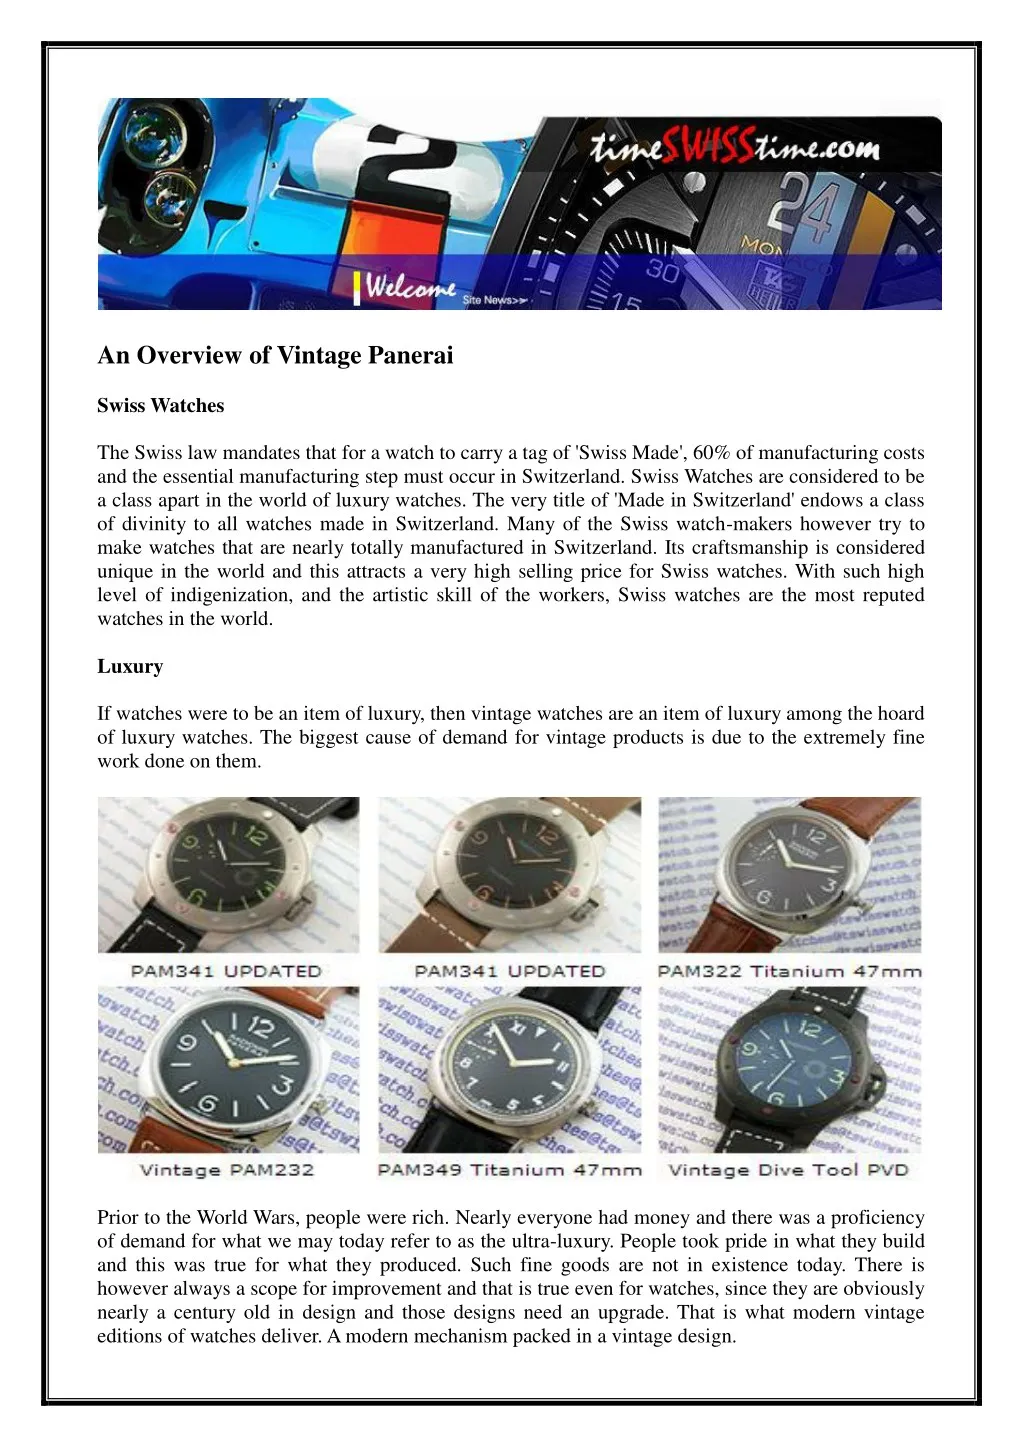 an overview of vintage panerai